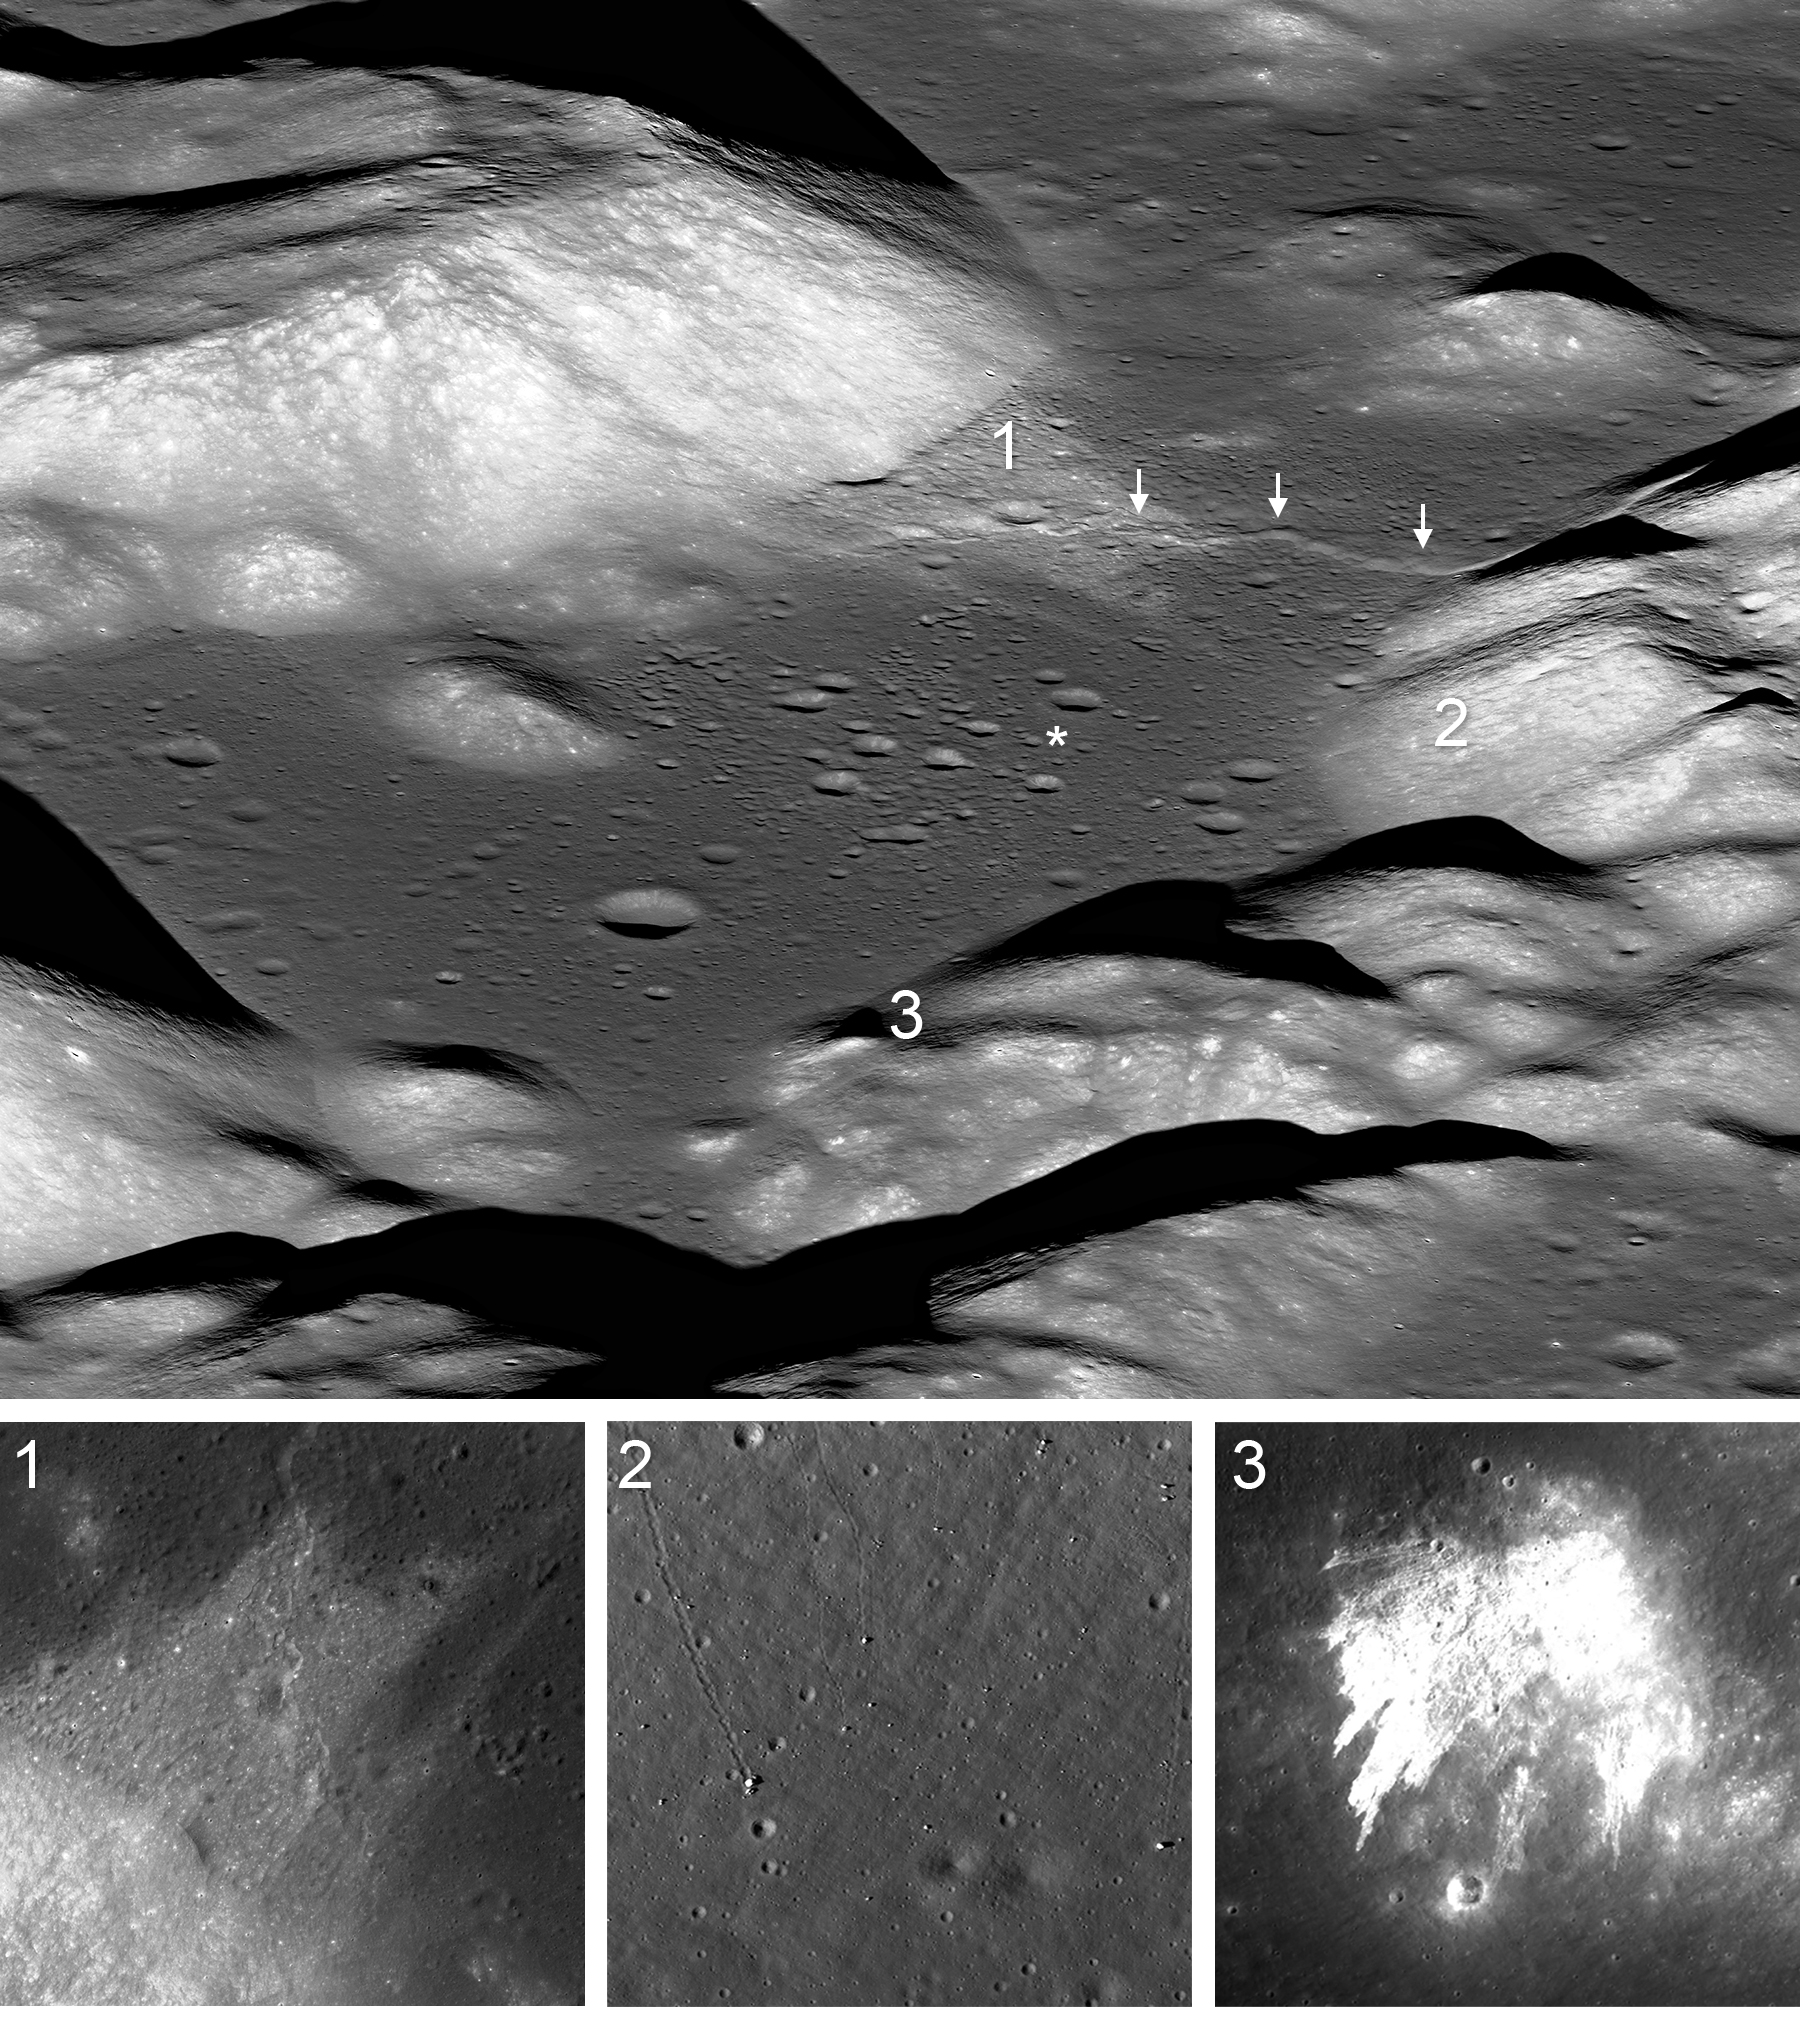 Evidence for moonquakes on Lee-Lincoln fault scarp